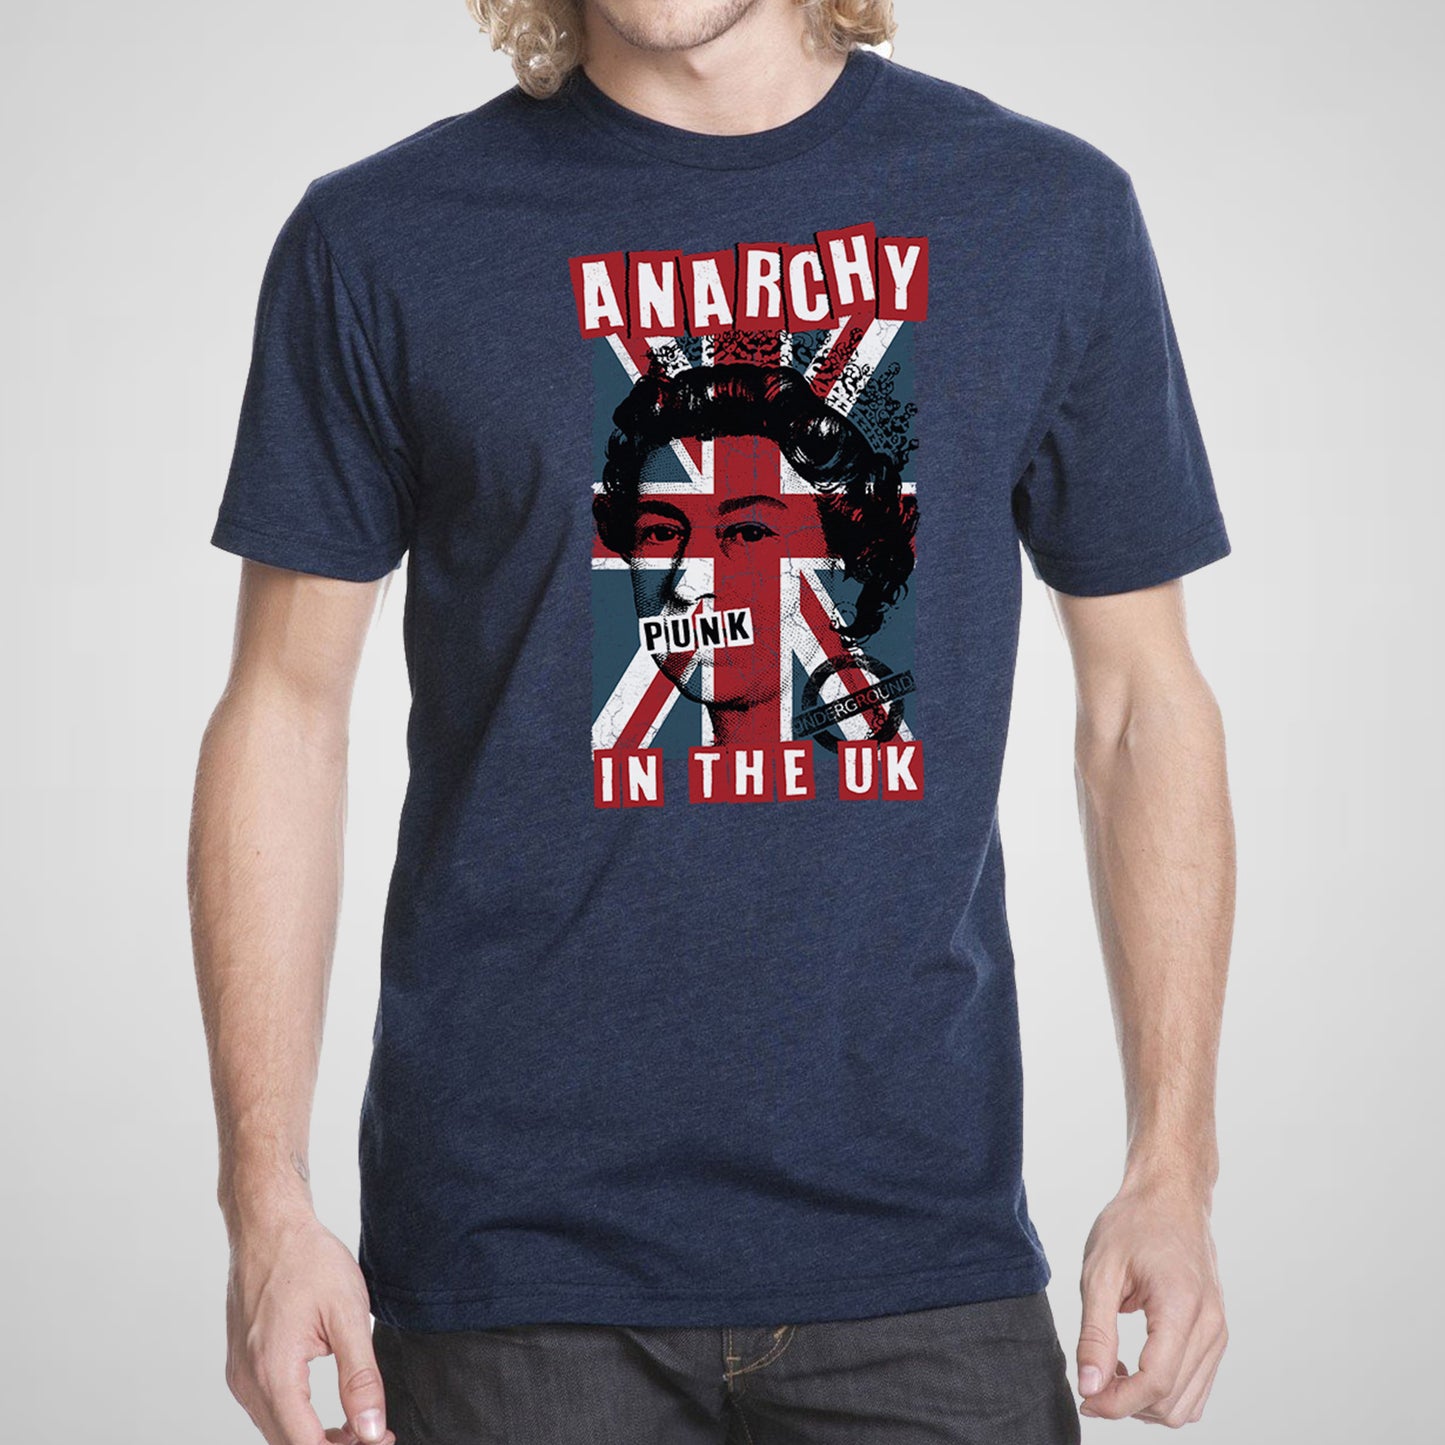 Anarchy in the UK - Men's Cotton/Poly Tee